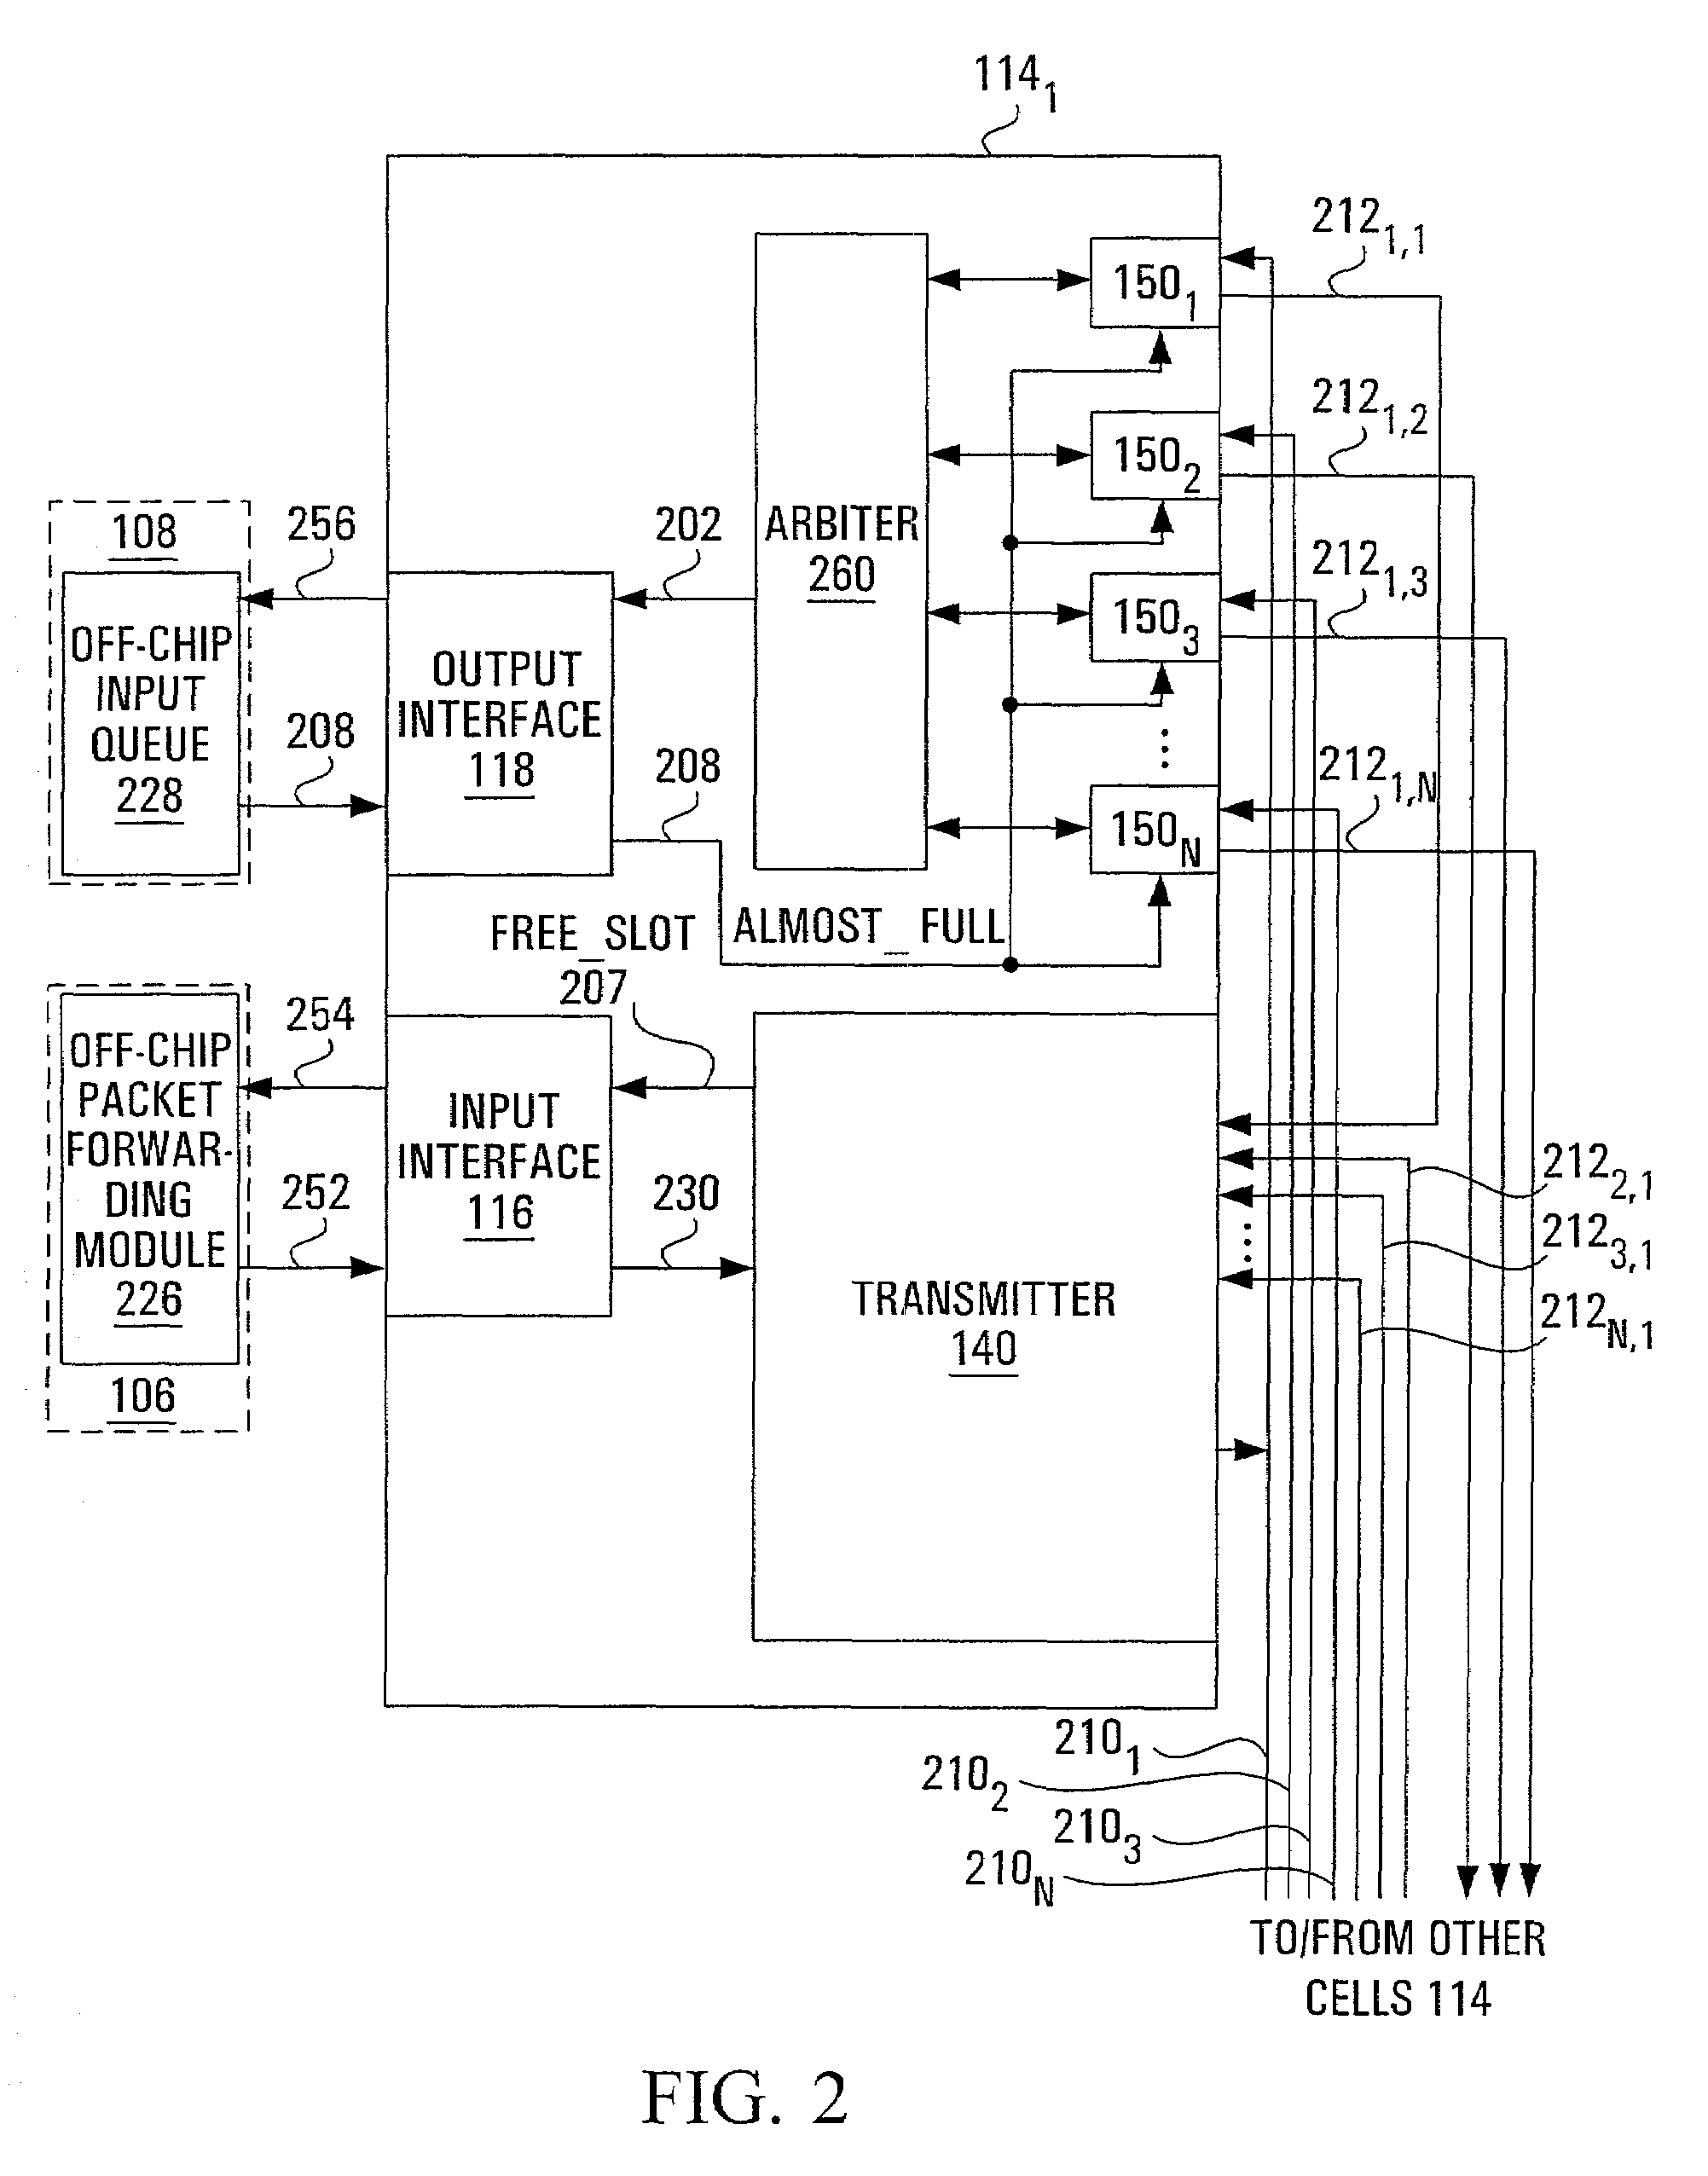 Cell-based switch fabric with distributed scheduling